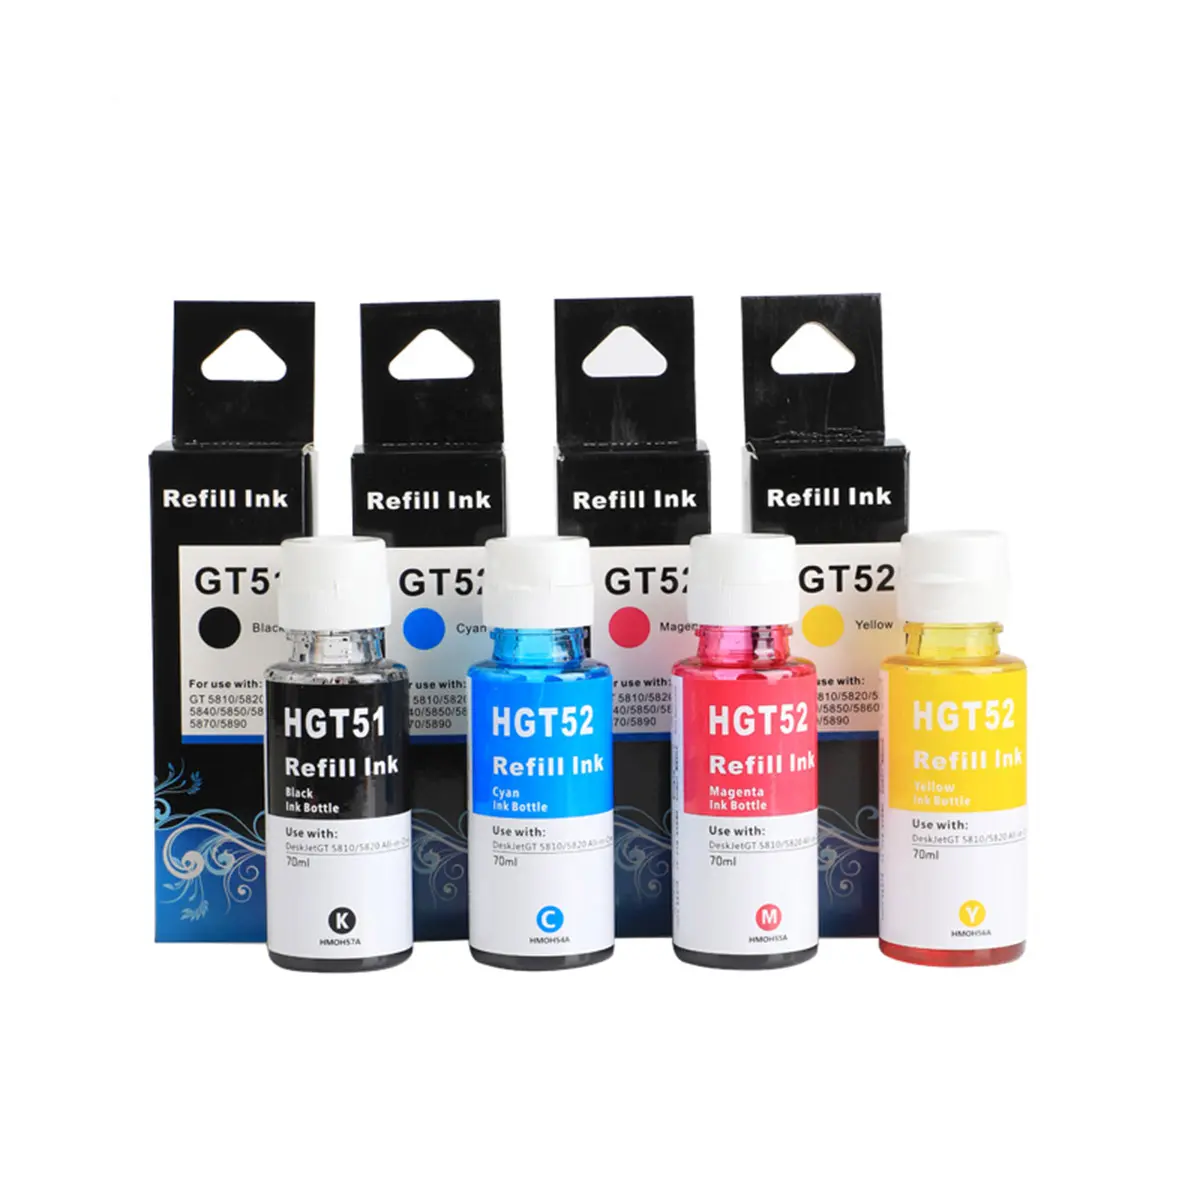 JC INK For HP GT51 GT52 GT53 refill Universal Dye INK for 5810 5820 310 318 319 419 410 Tinta Encre Eco tank system printer